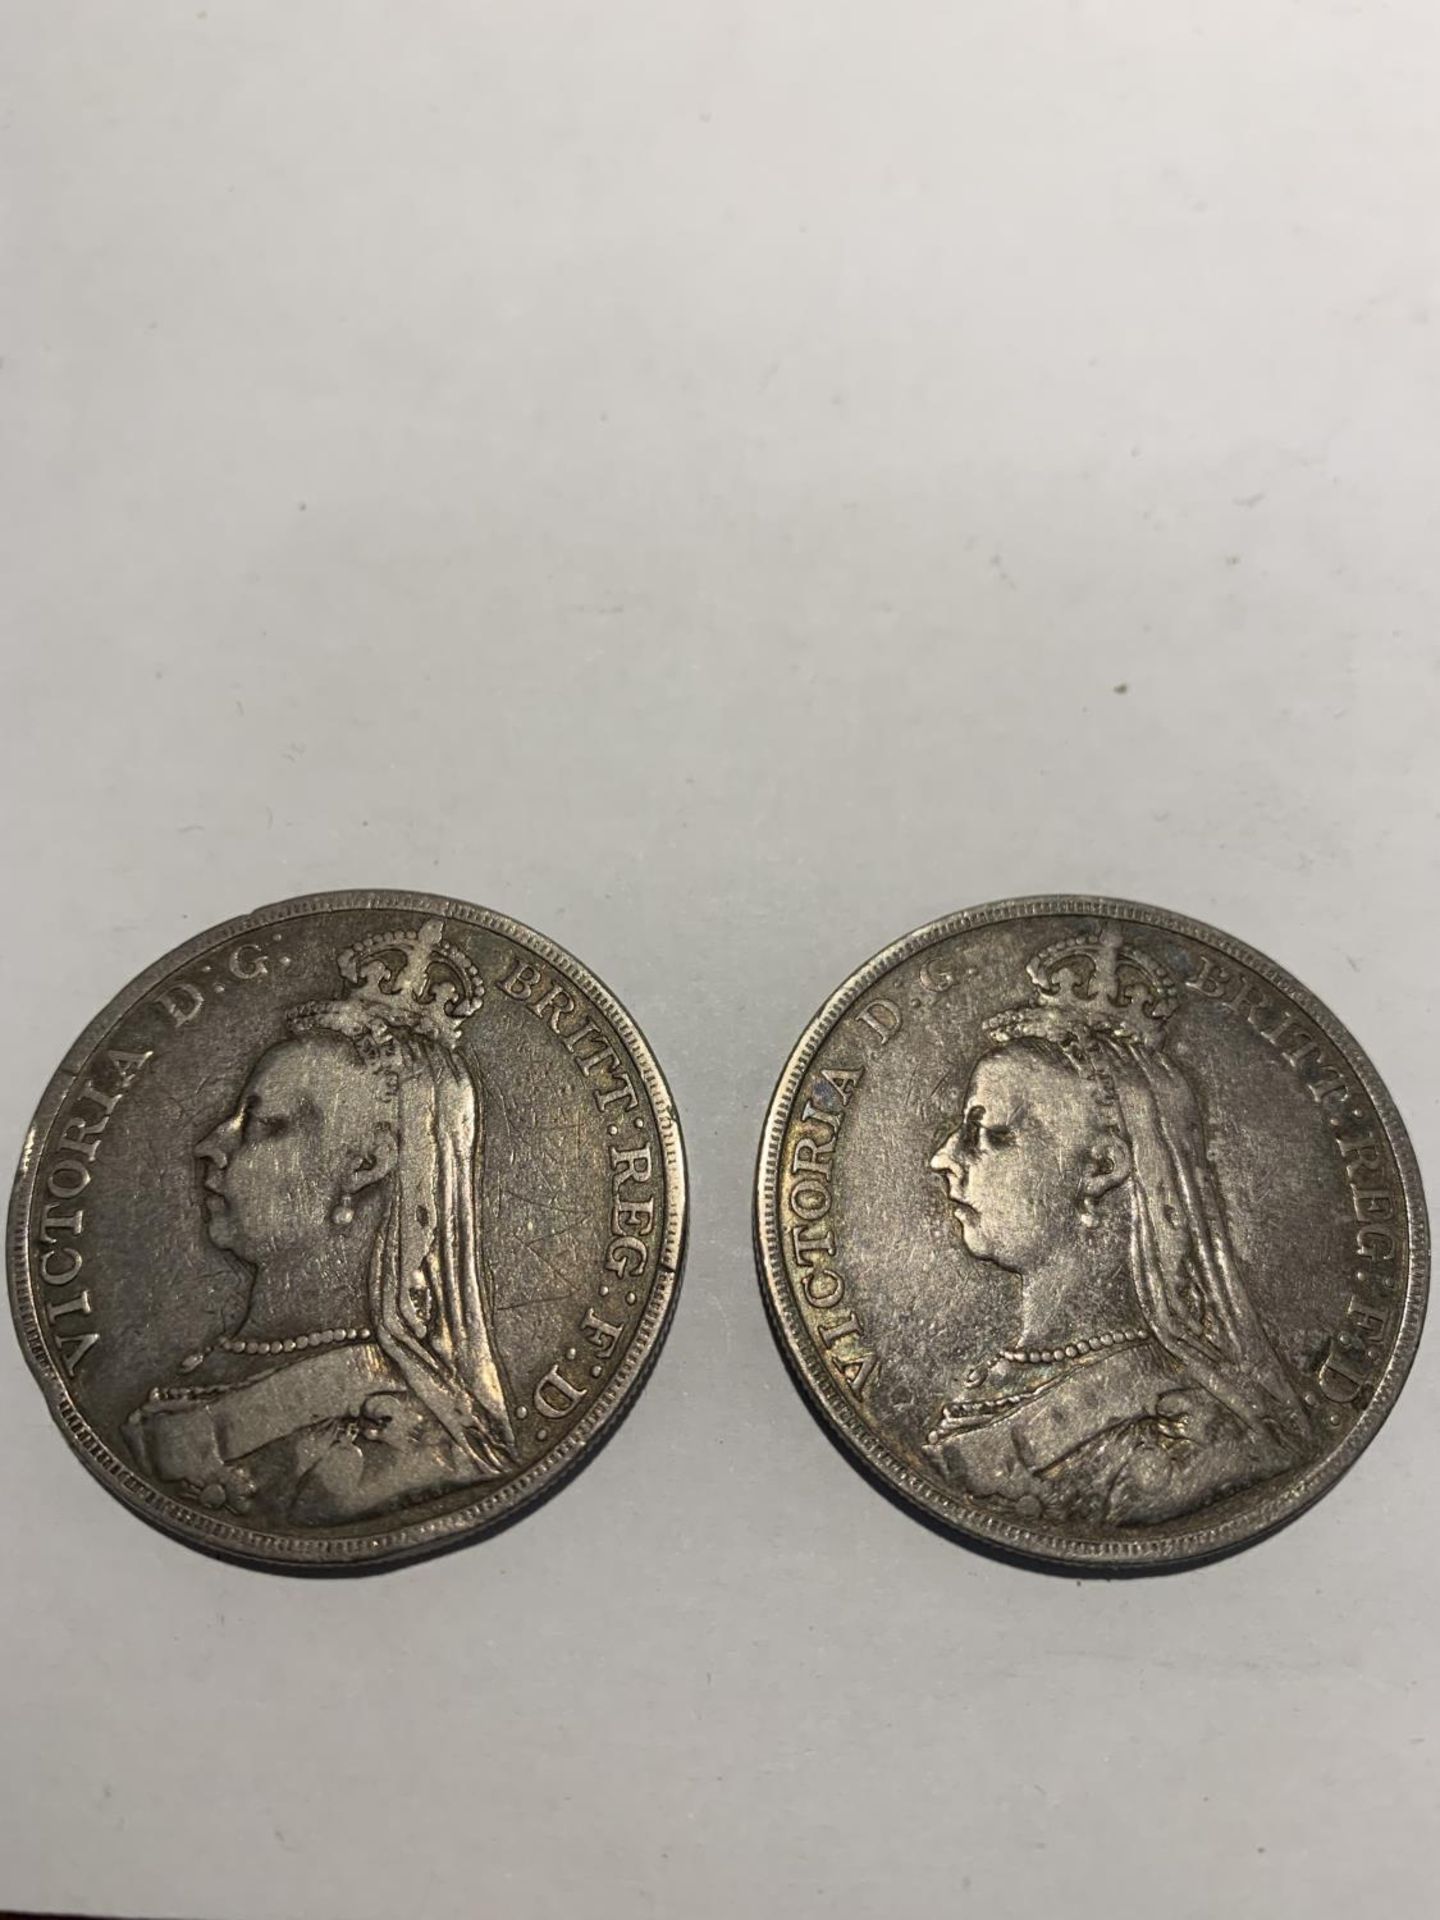 TWO QUEEN VICOTIA SILVER CROWNS DATED 1889 AND 1890, GEORGE VI 1937 CROWN, FIVE POUND, DOLLAR AND - Image 3 of 5